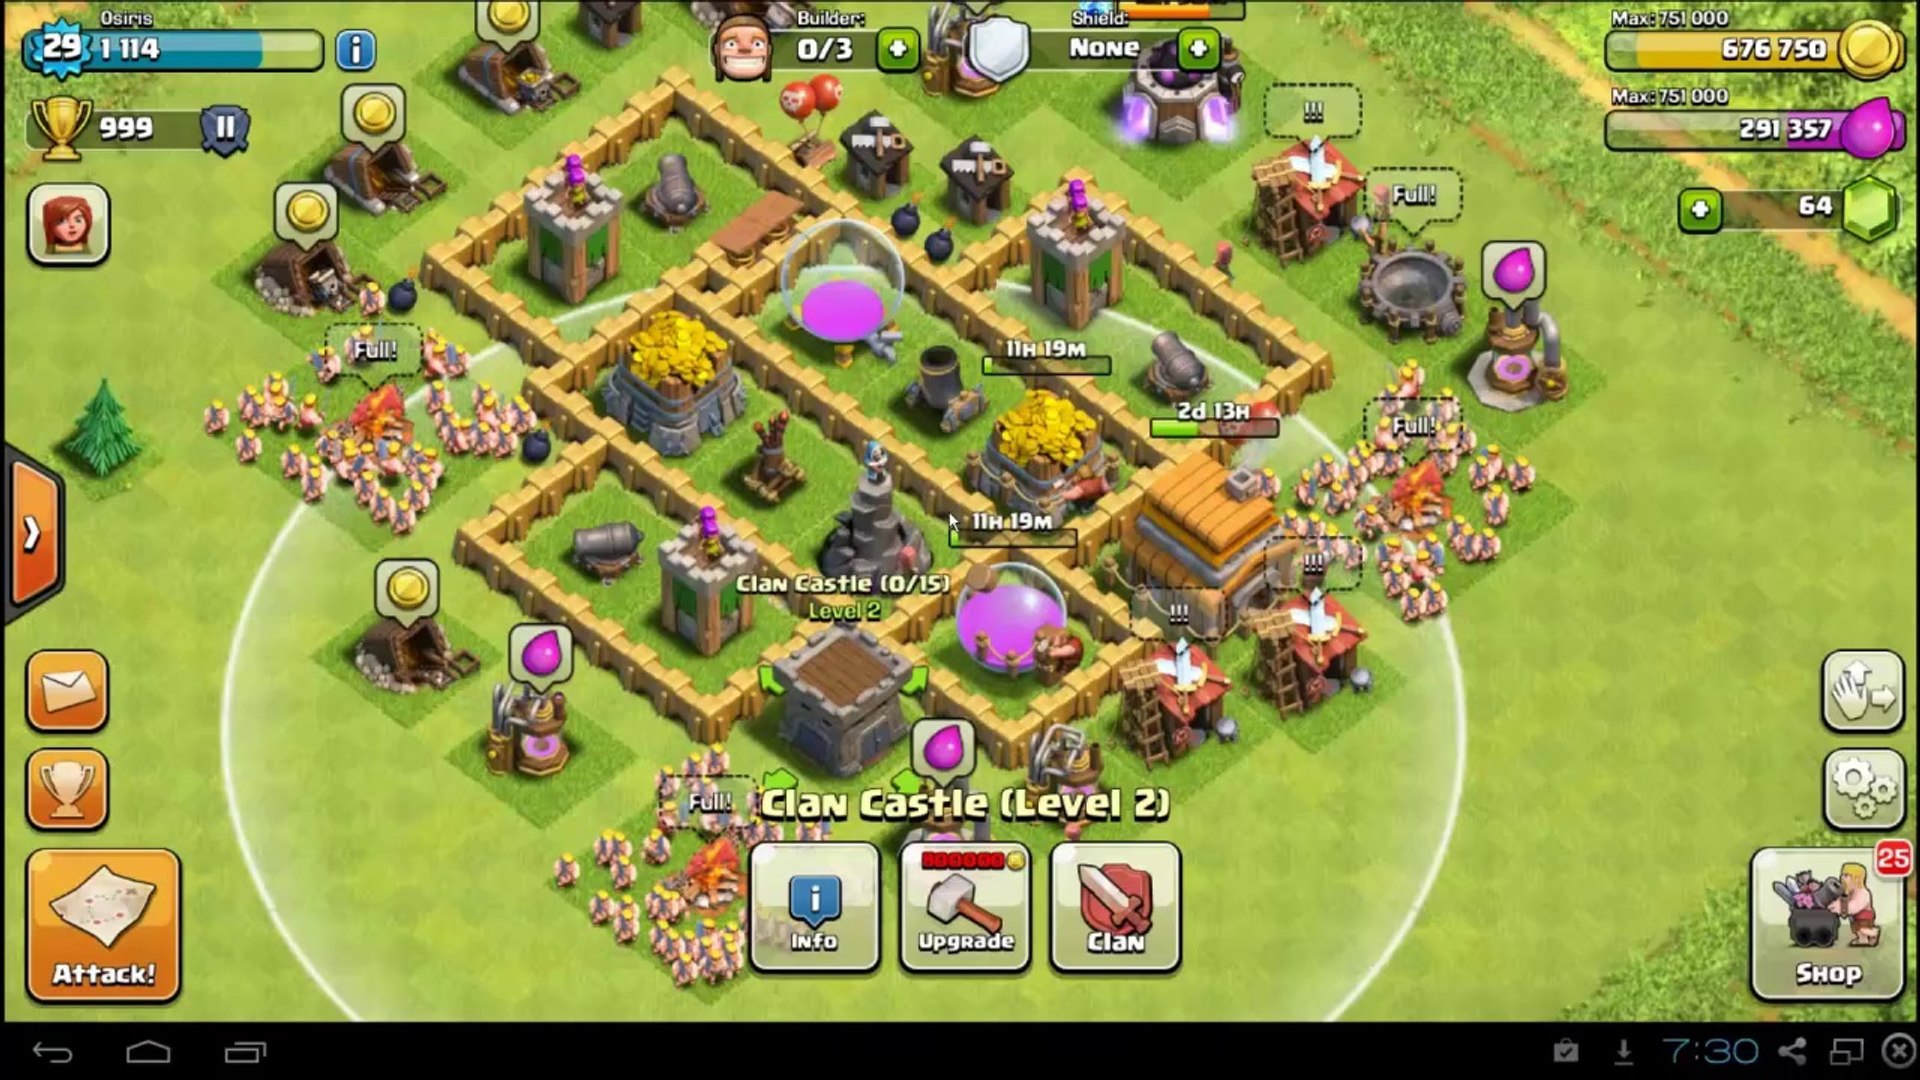 Guide To Defending Your Town Hall 5 Base In Clash Of Clans.